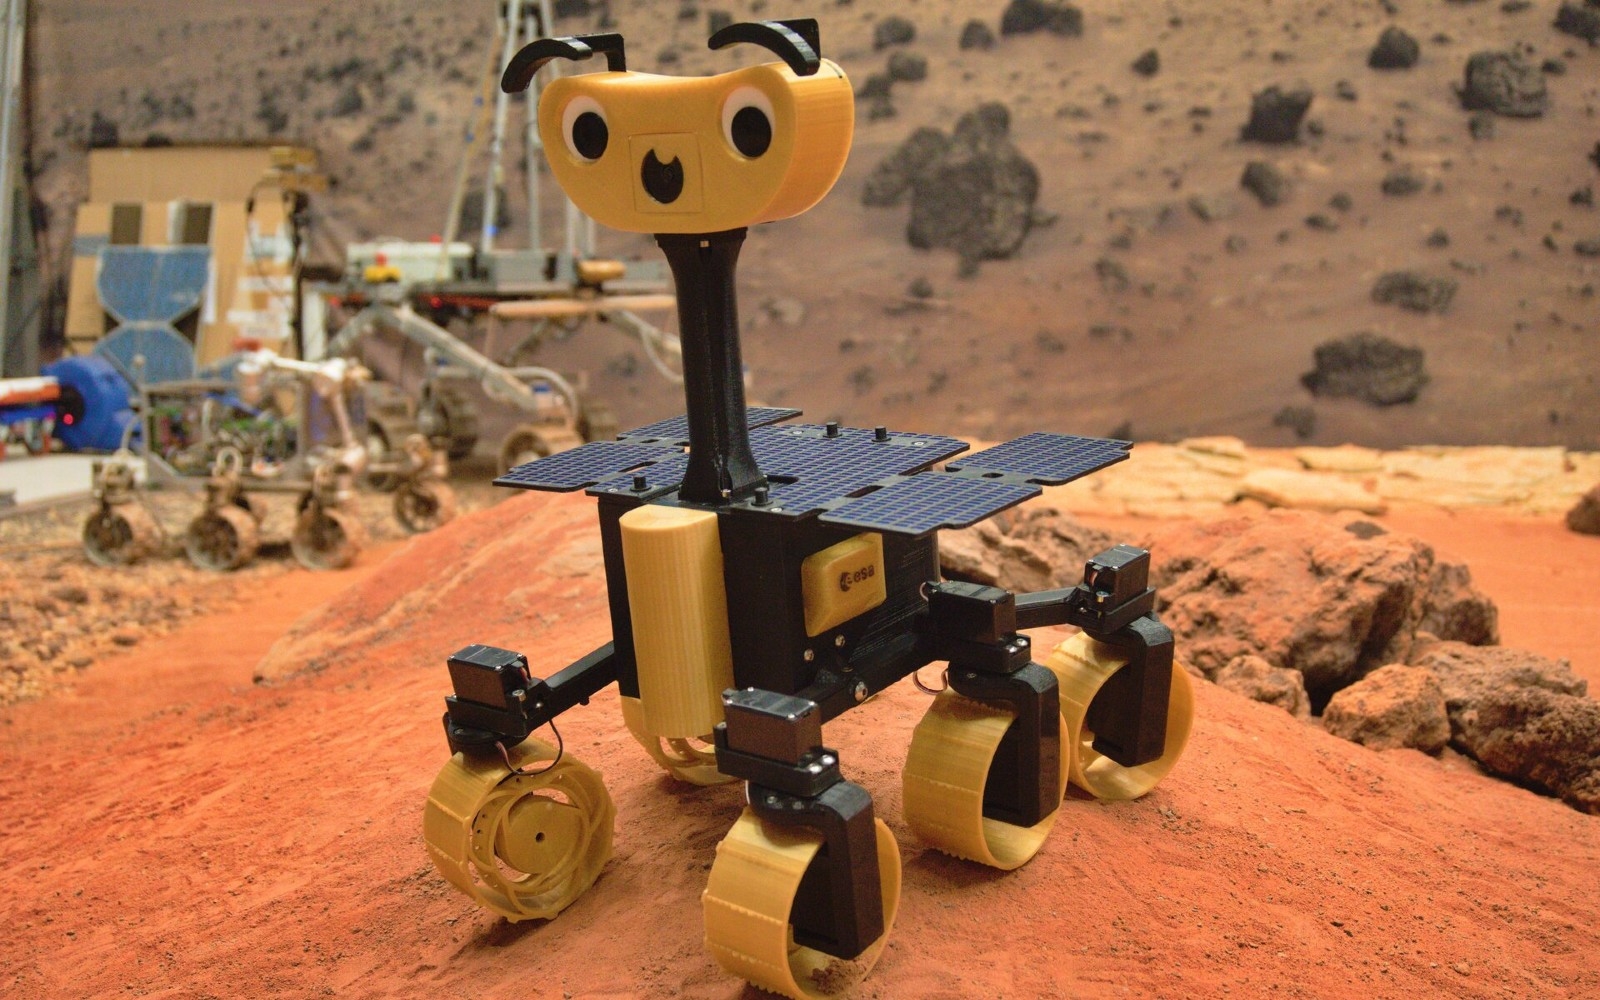 The ExoMy is a programmable $600 Mars rover you can build yourself | DeviceDaily.com